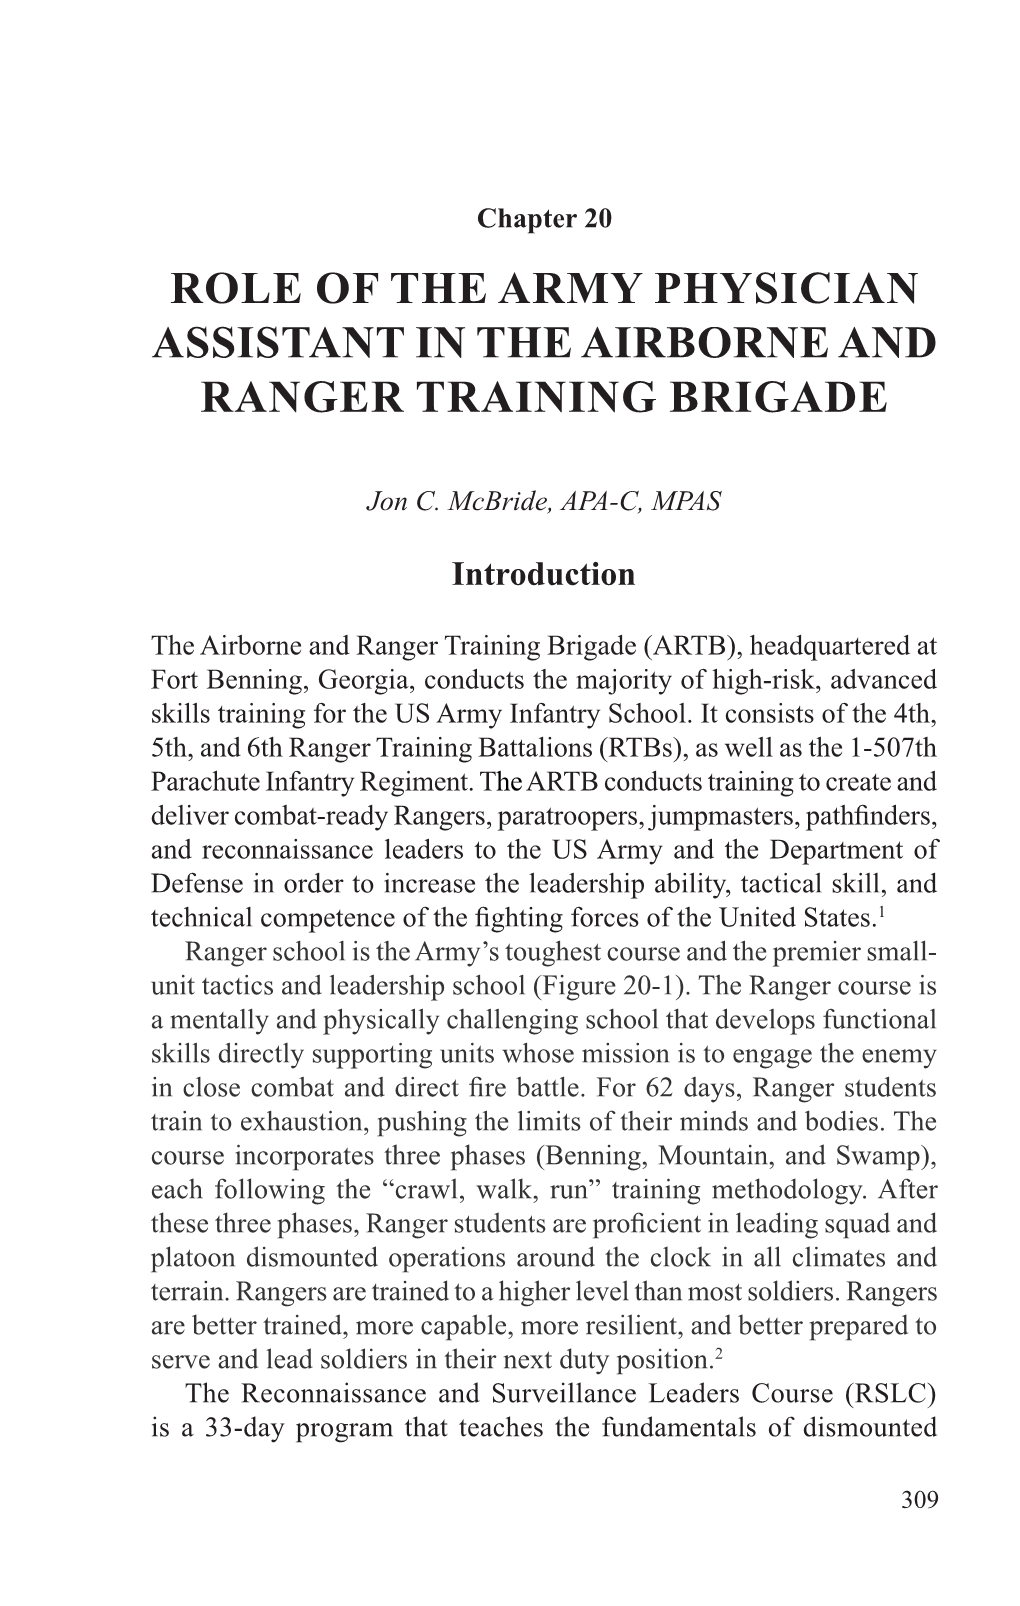 Role of the Army Physician Assistant in the Airborne and Ranger Training Brigade